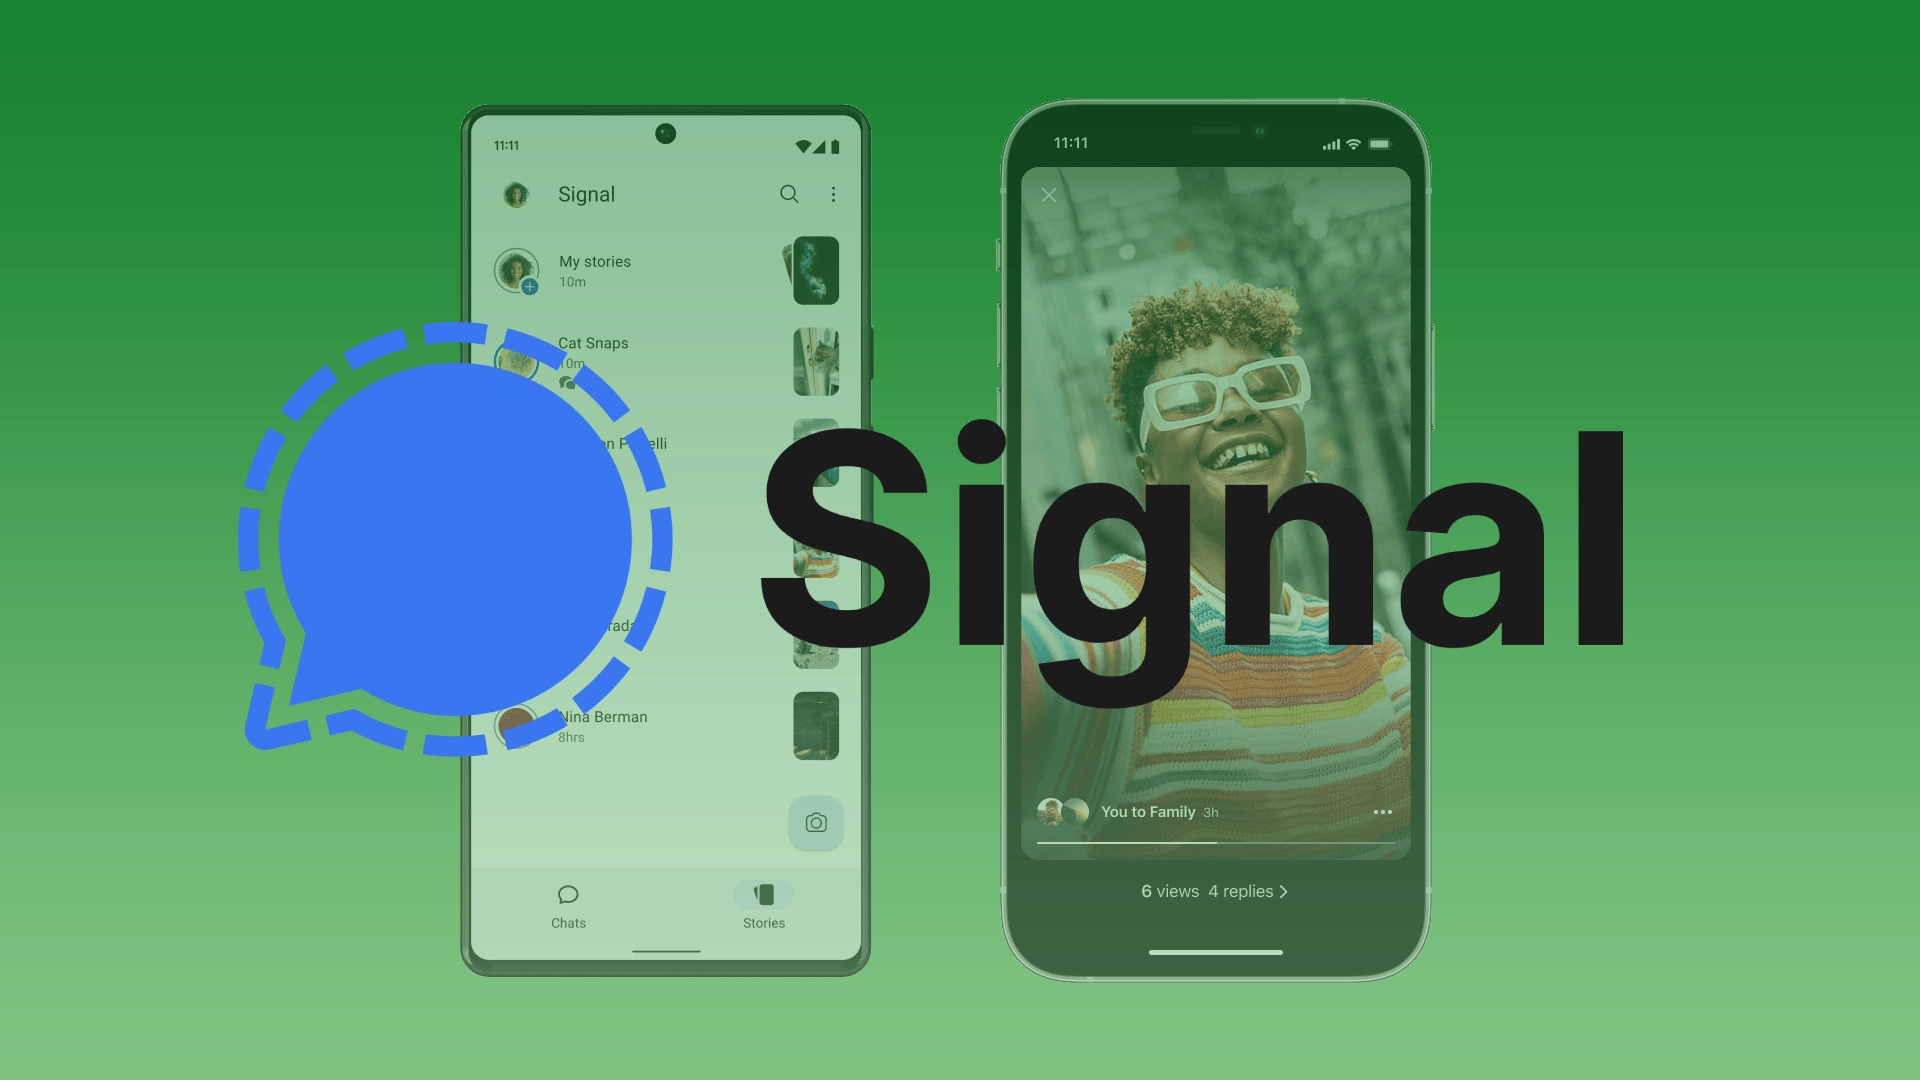 Now you can post Stories on Signal messaging app